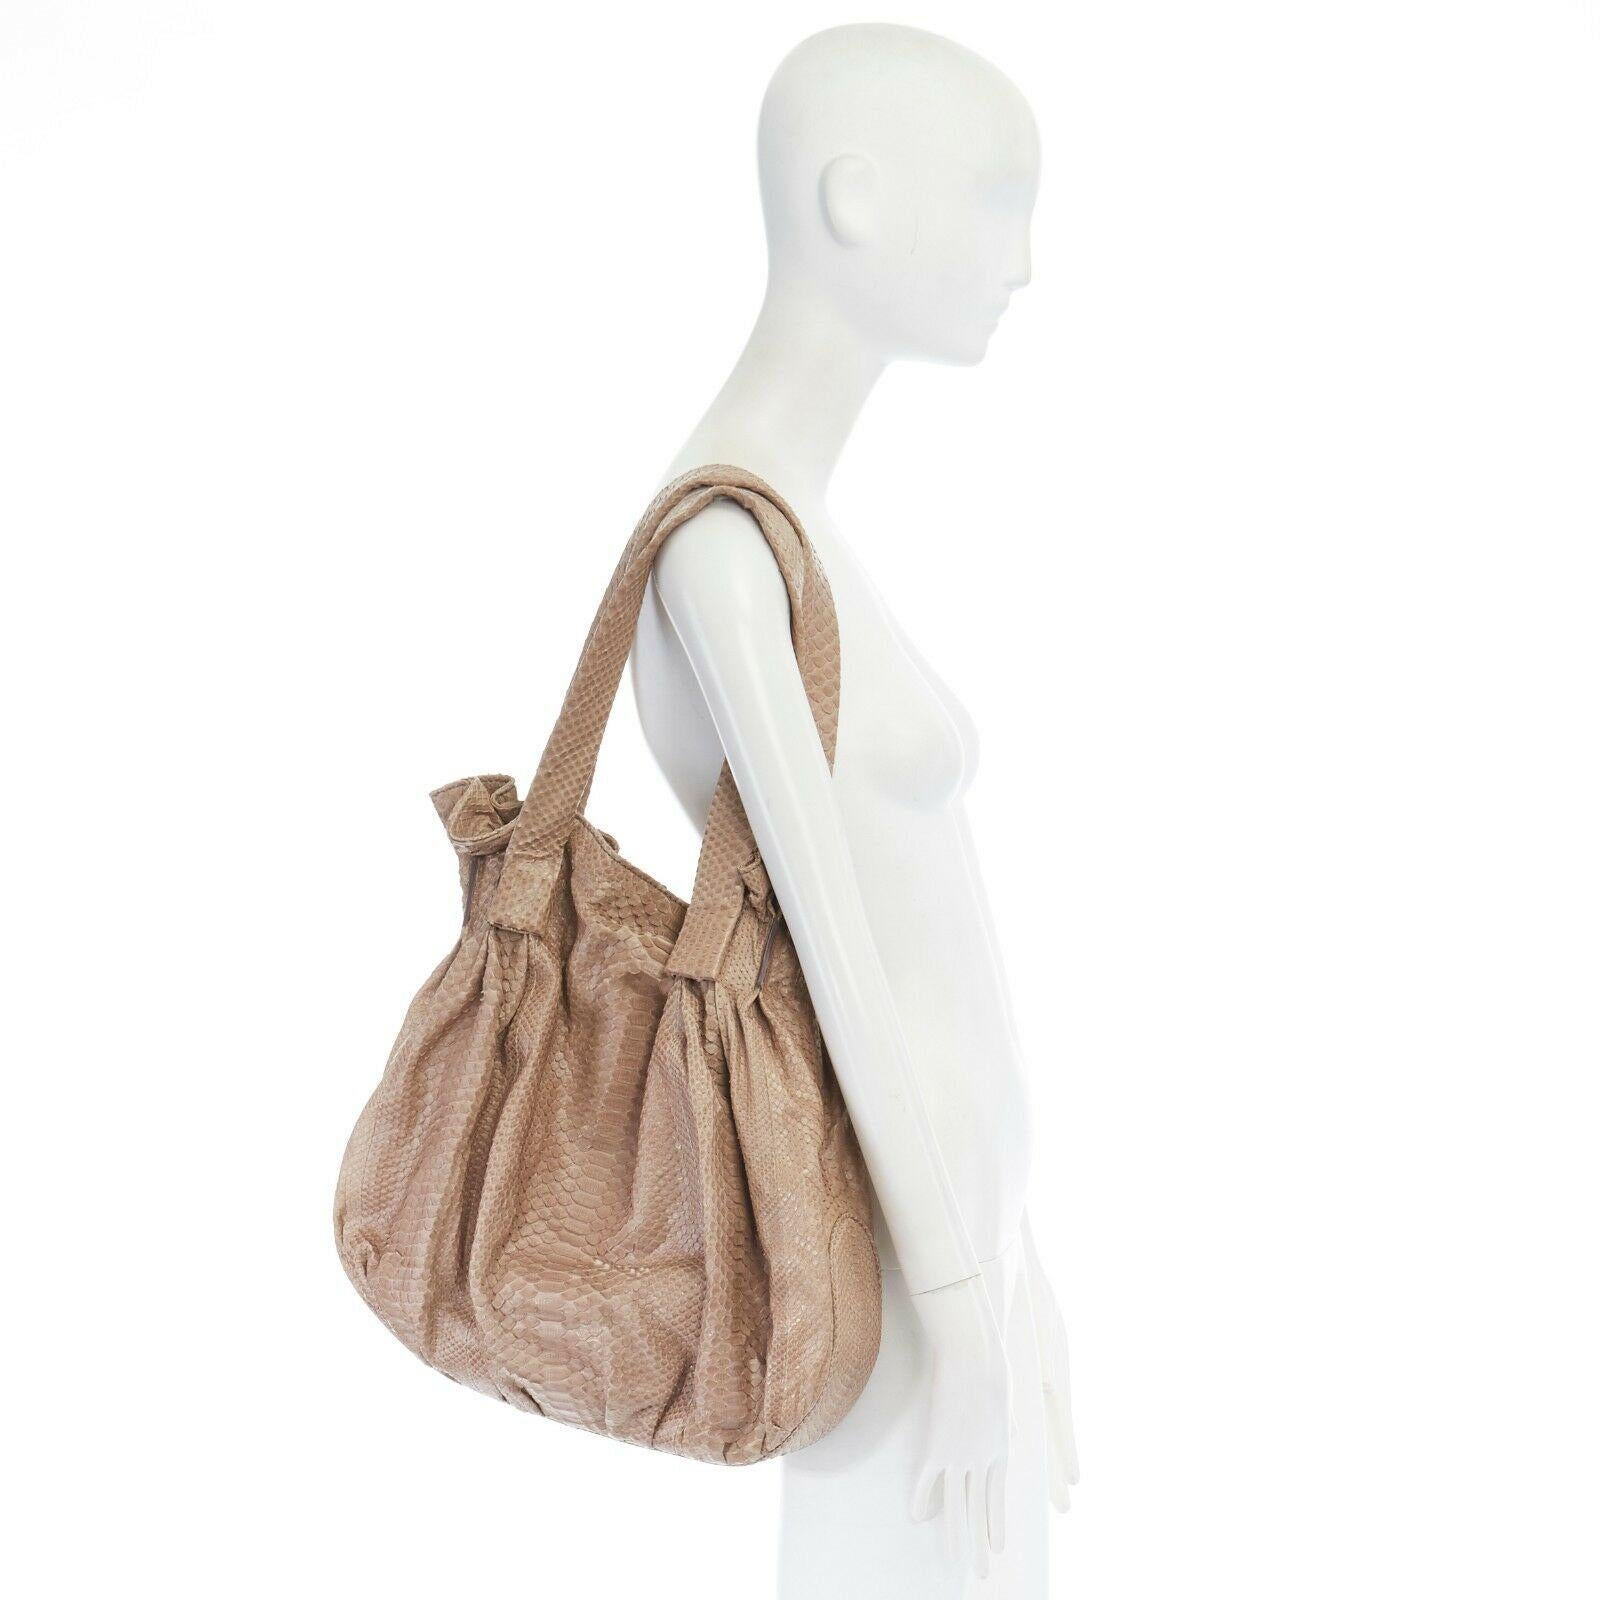 ZAGLIANI brown scaled leather rusched dumpling large shoulder hobo bag
Brand: Zagliani
Model Name / Style: Hobo bag
Material: Leather
Color: Brown
Pattern: Solid
Extra Detail: Magnetic top closure.
Made in: Italy

CONDITION: 
Condition: Good, this